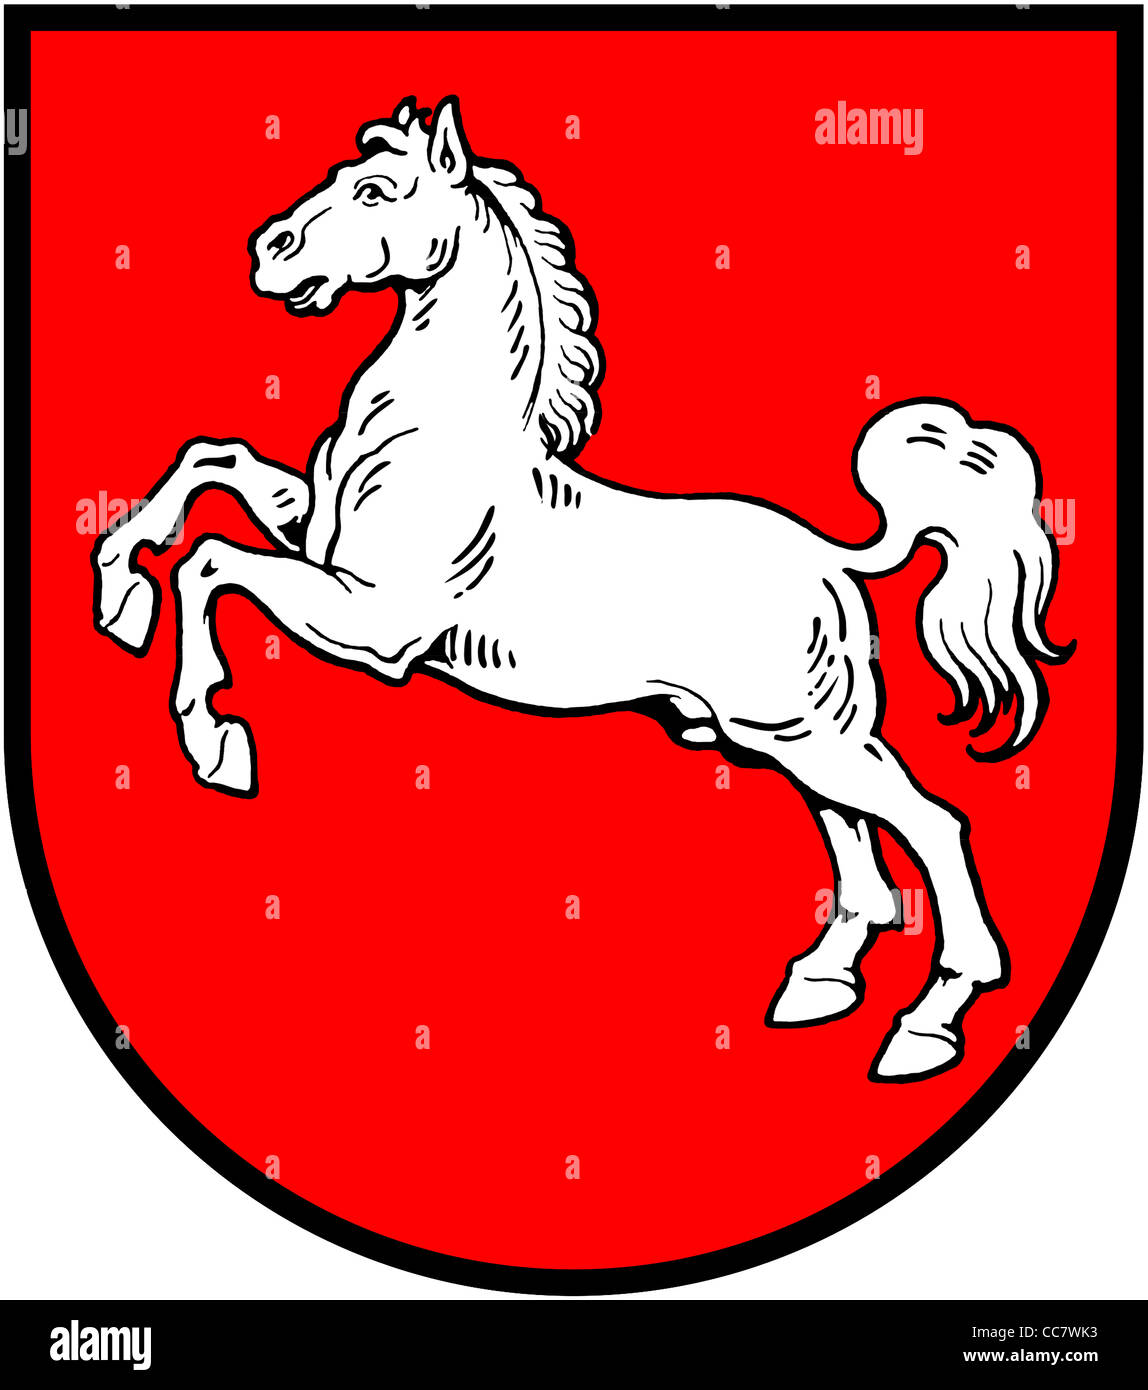 Coat of arms of the German federal state Lower Saxony. Stock Photo